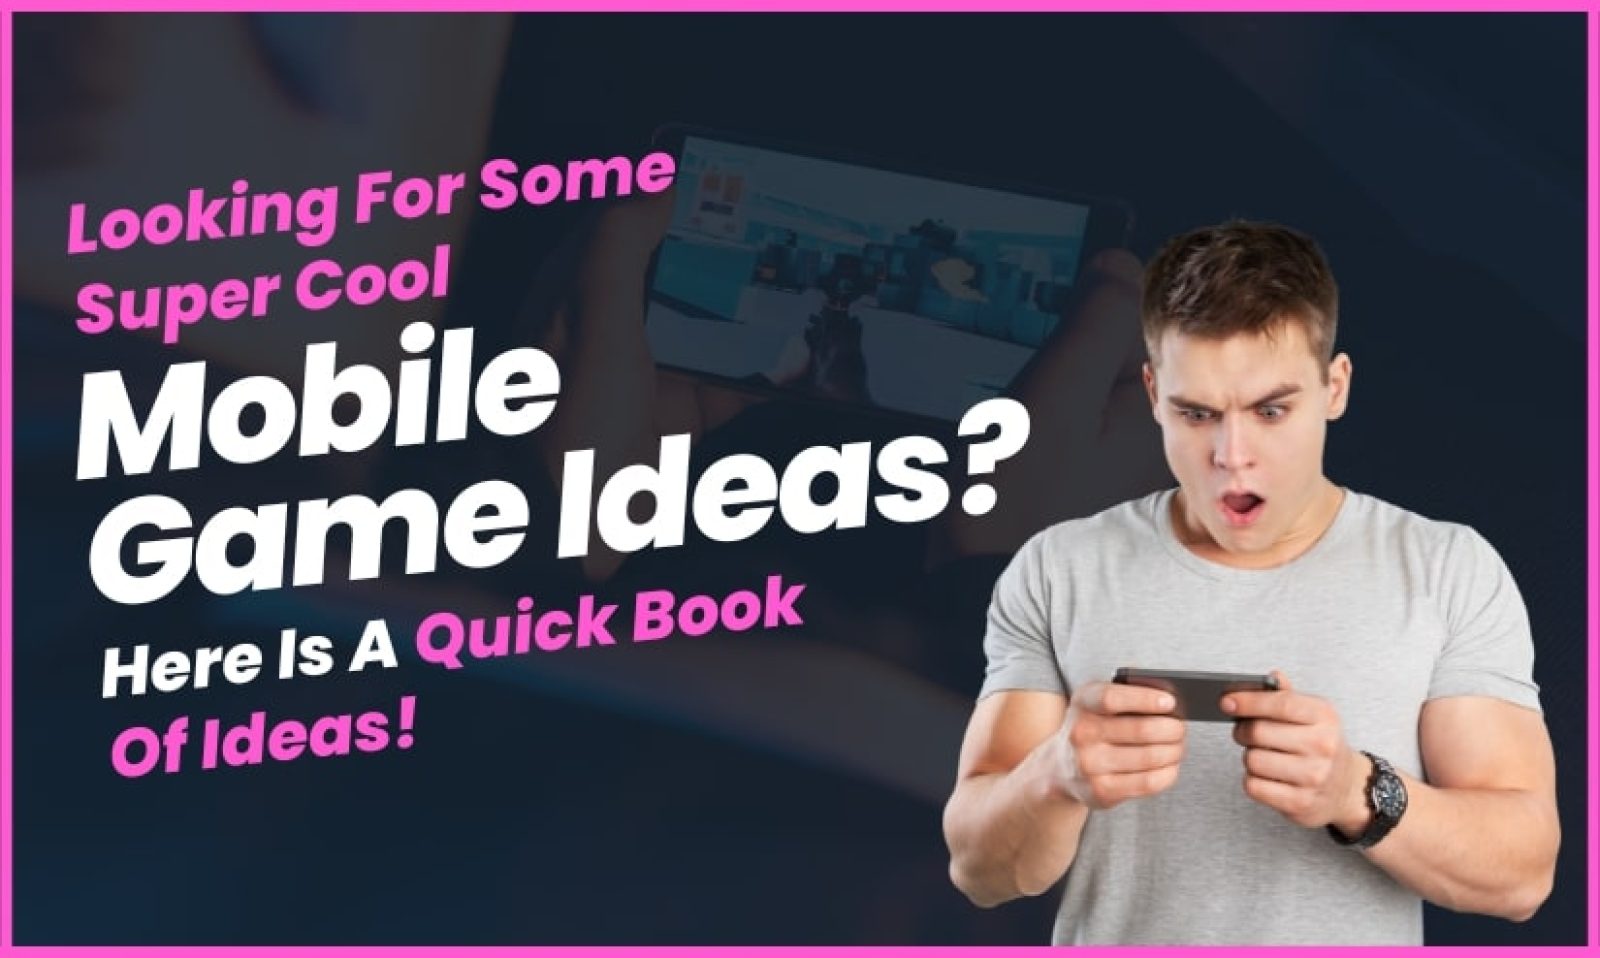 Looking For Some Super Cool Mobile Game Ideas Here Is A Quick Book Of Ideas!